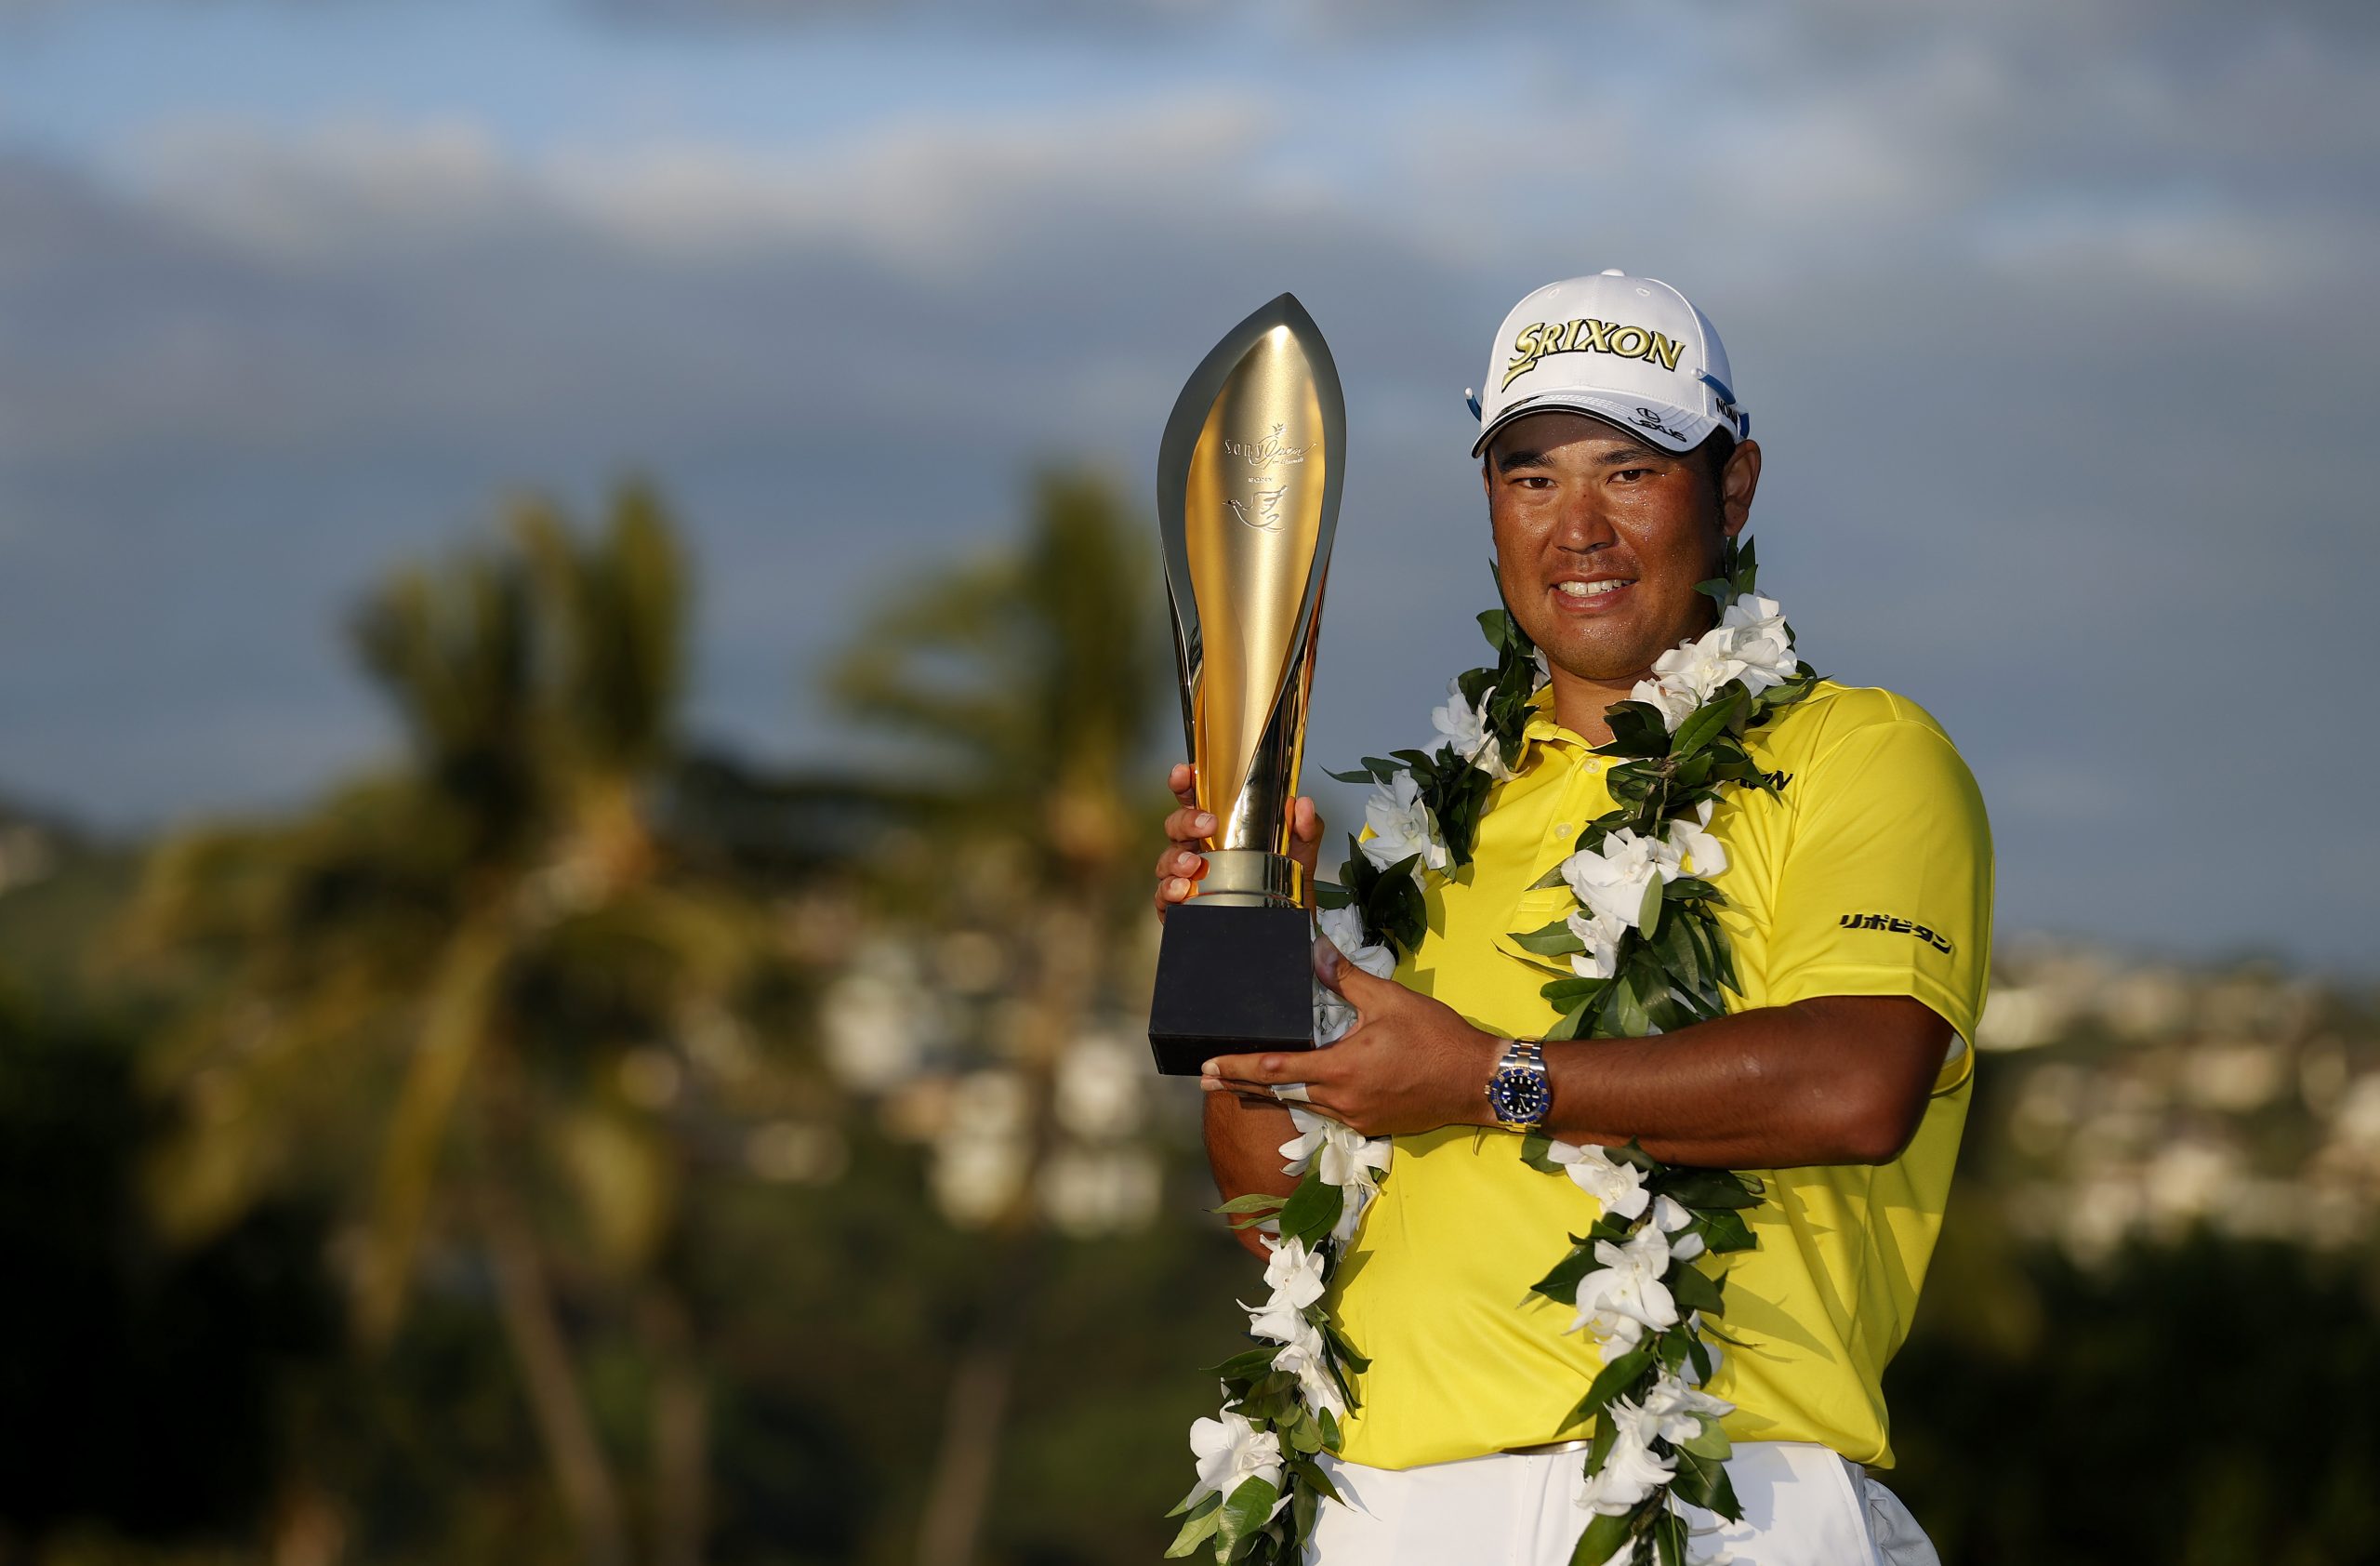 Magical Matsuyama equals wins record at Sony Open in Hawaii in stunning fashion